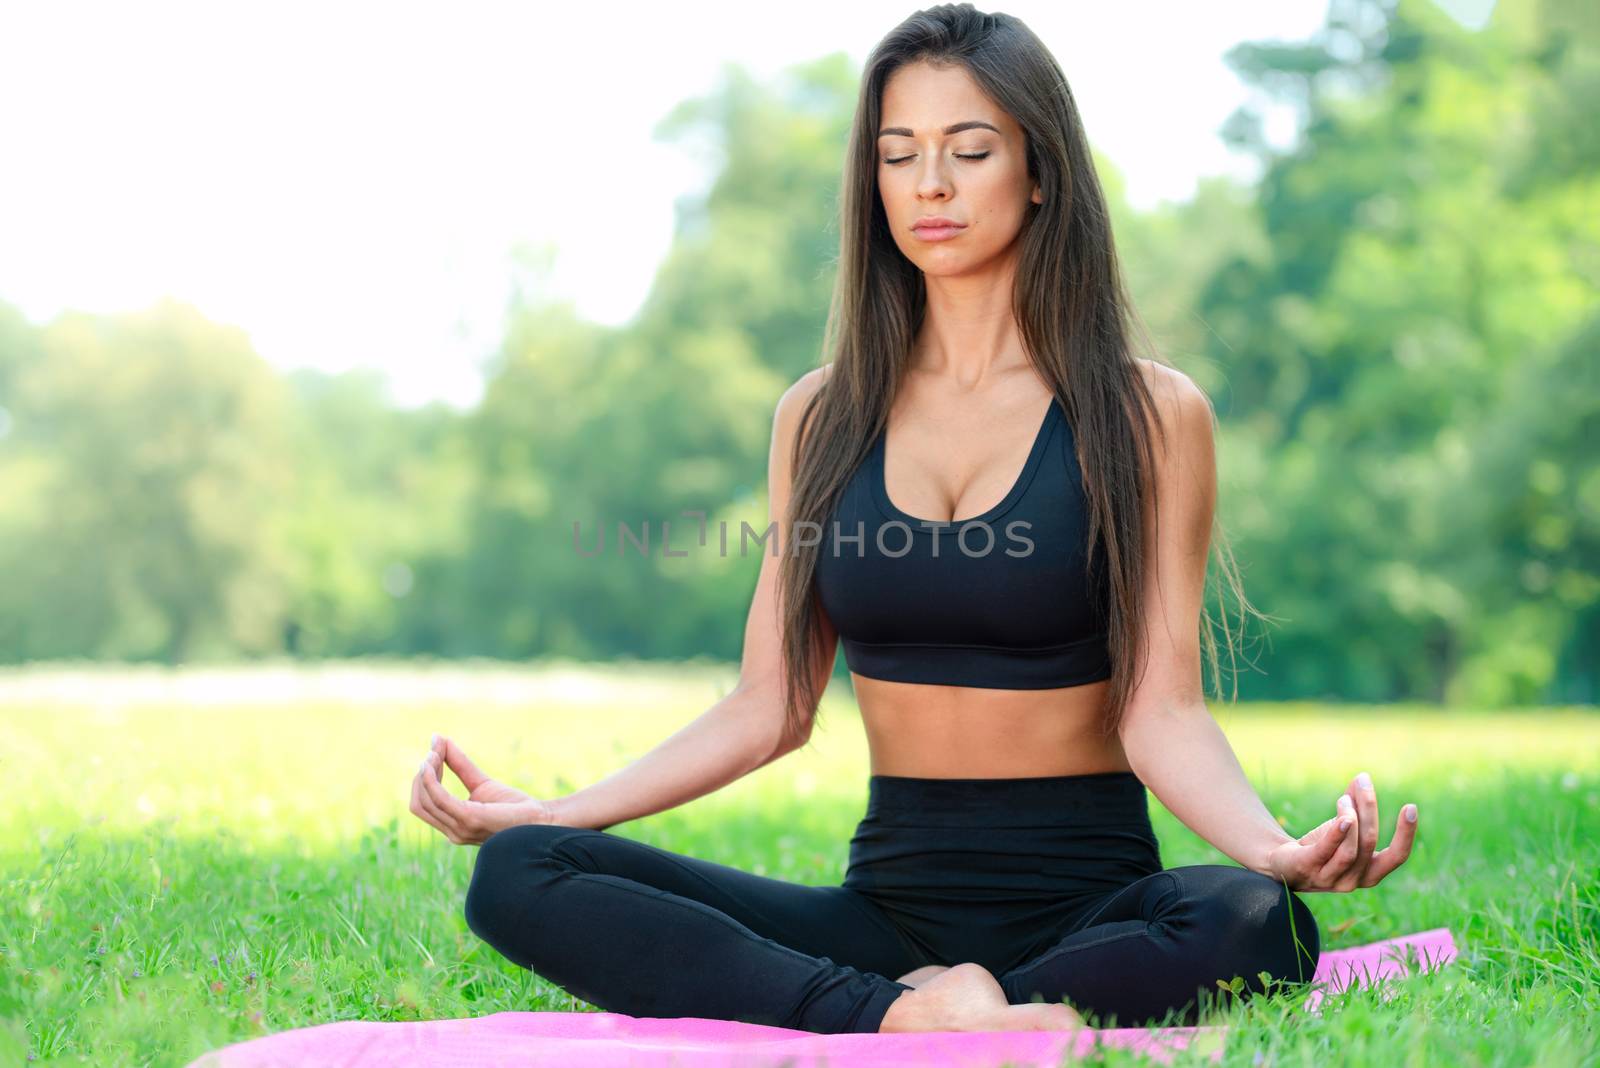 Attractive and young woman doing yoga meditation in a lotus pose outdoors in a park on a sunny day